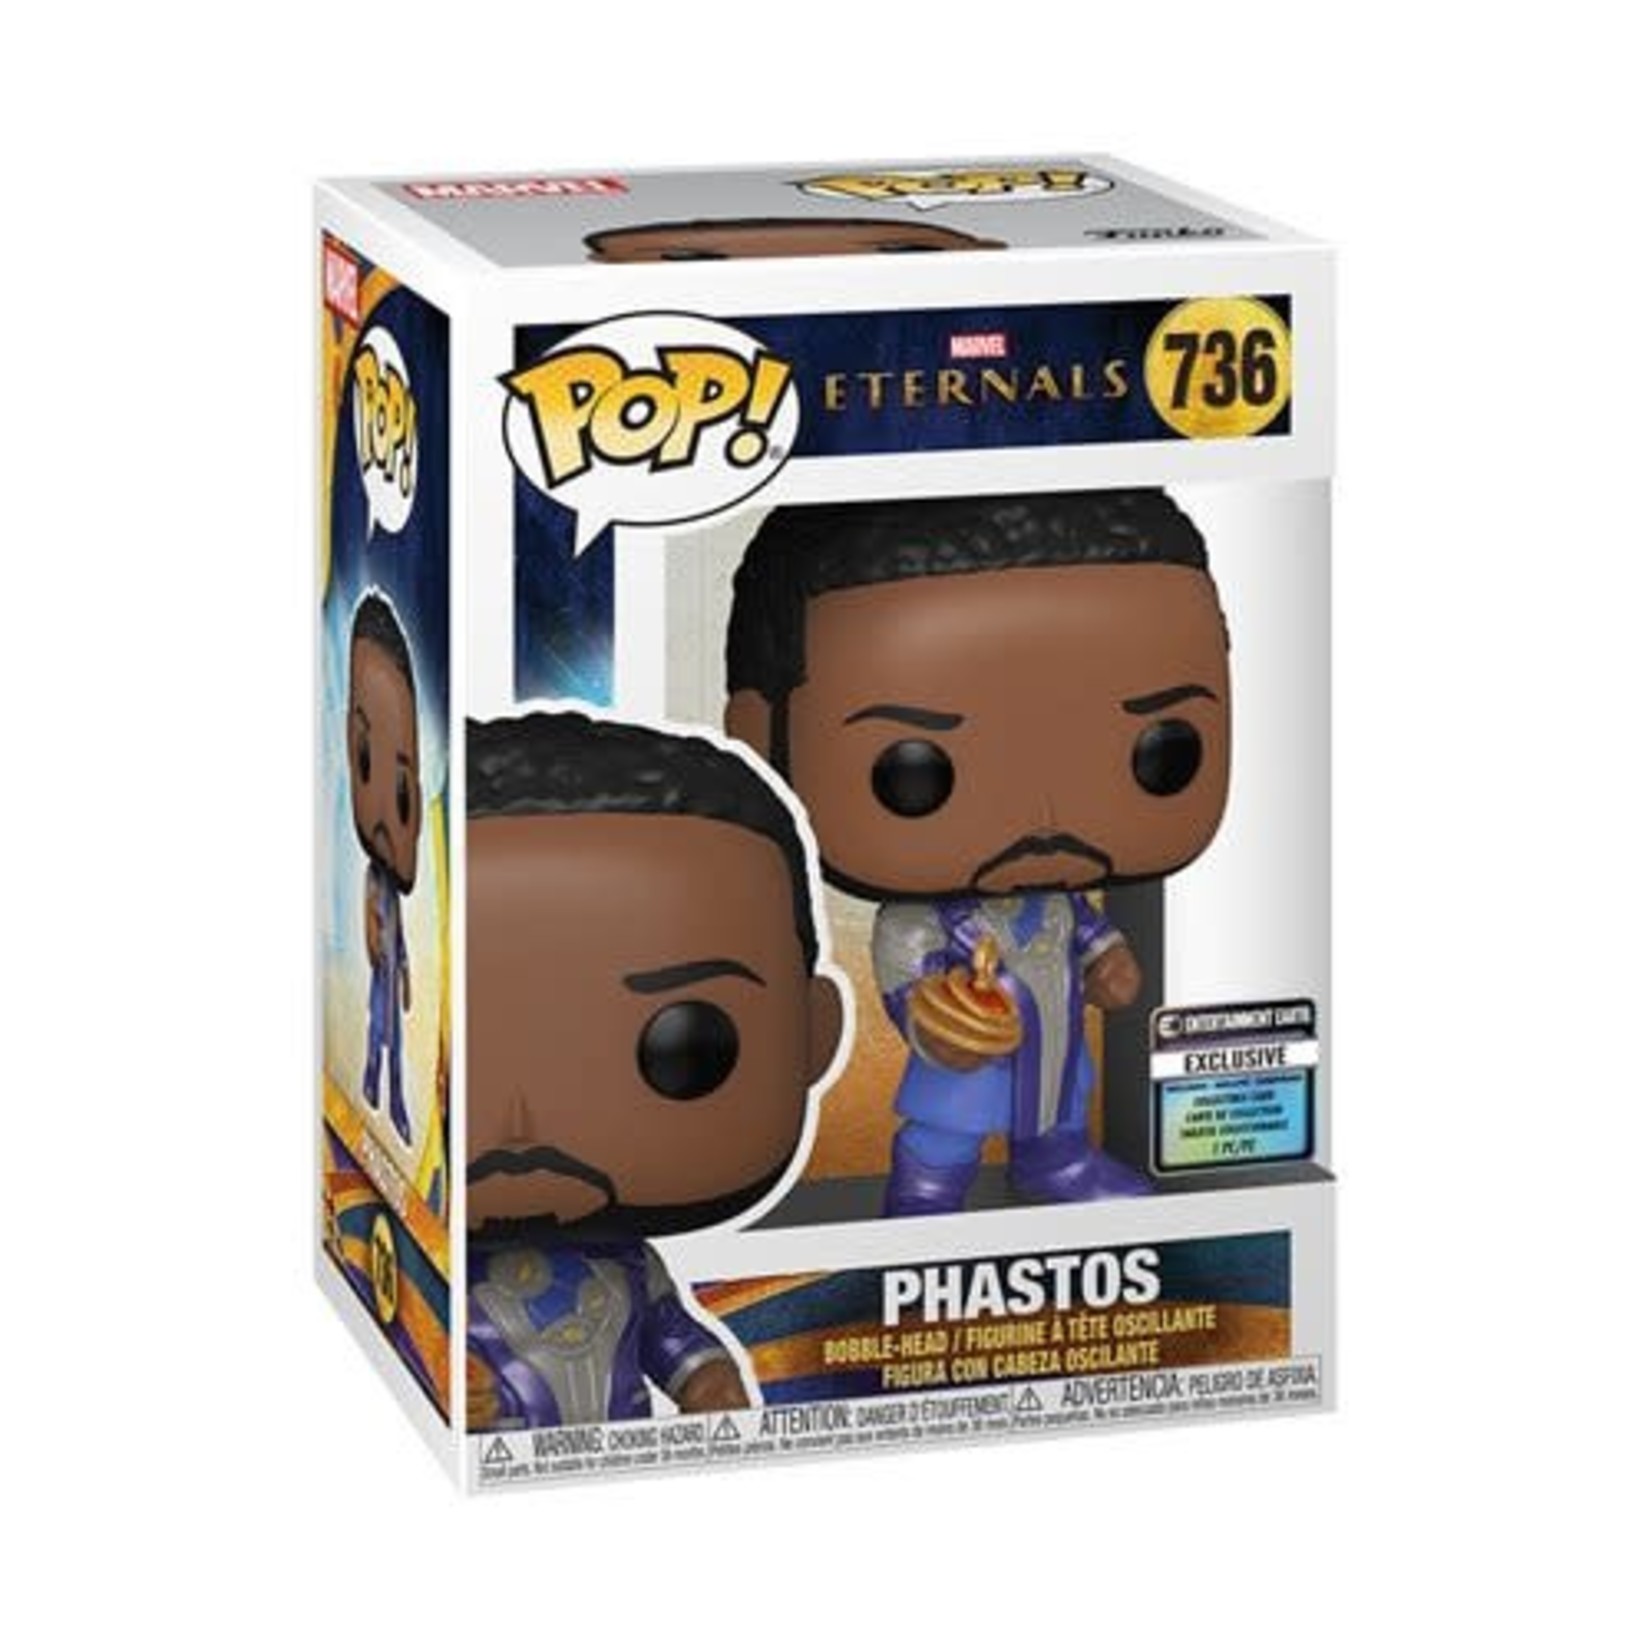 Funko Eternals Phastos Pop! Vinyl Figure with Collectible Card - Entertainment Earth Exclusive